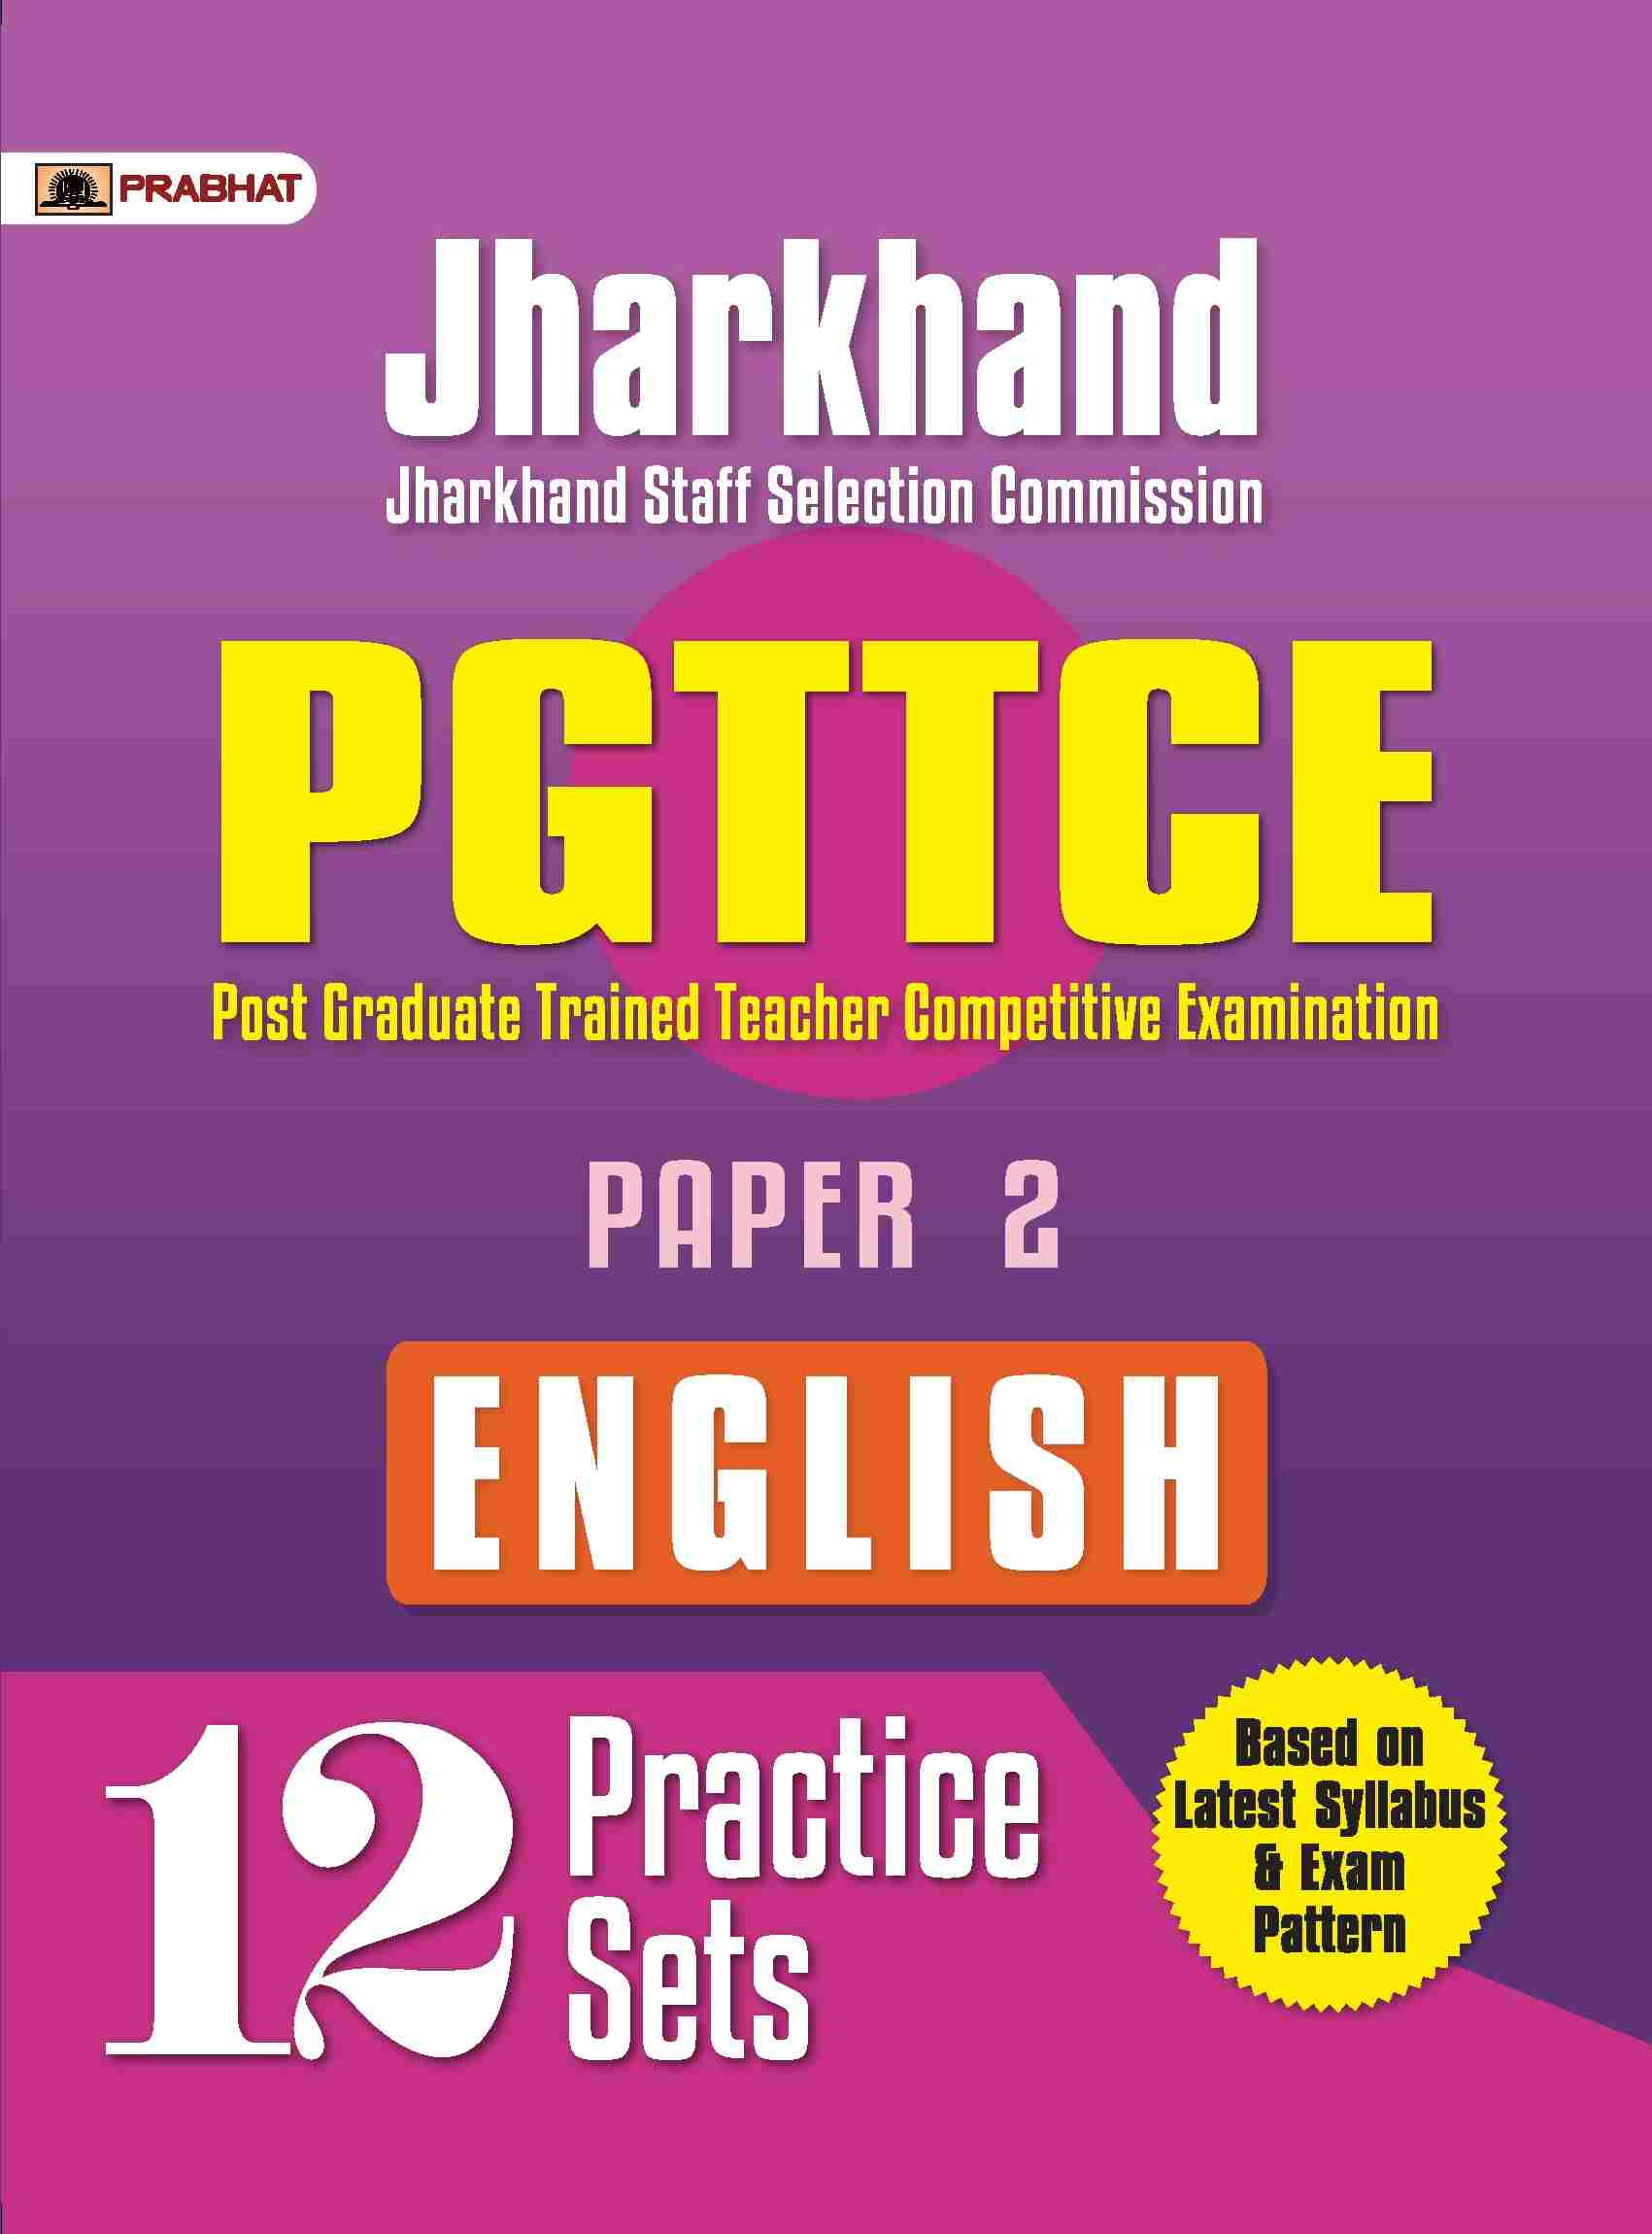 Jharkhand Staff Selection Commission (JSSC PGTTCE English) Post Graduate Trained Teacher Competitive Examination Paper 2 English (12 Practice Sets)